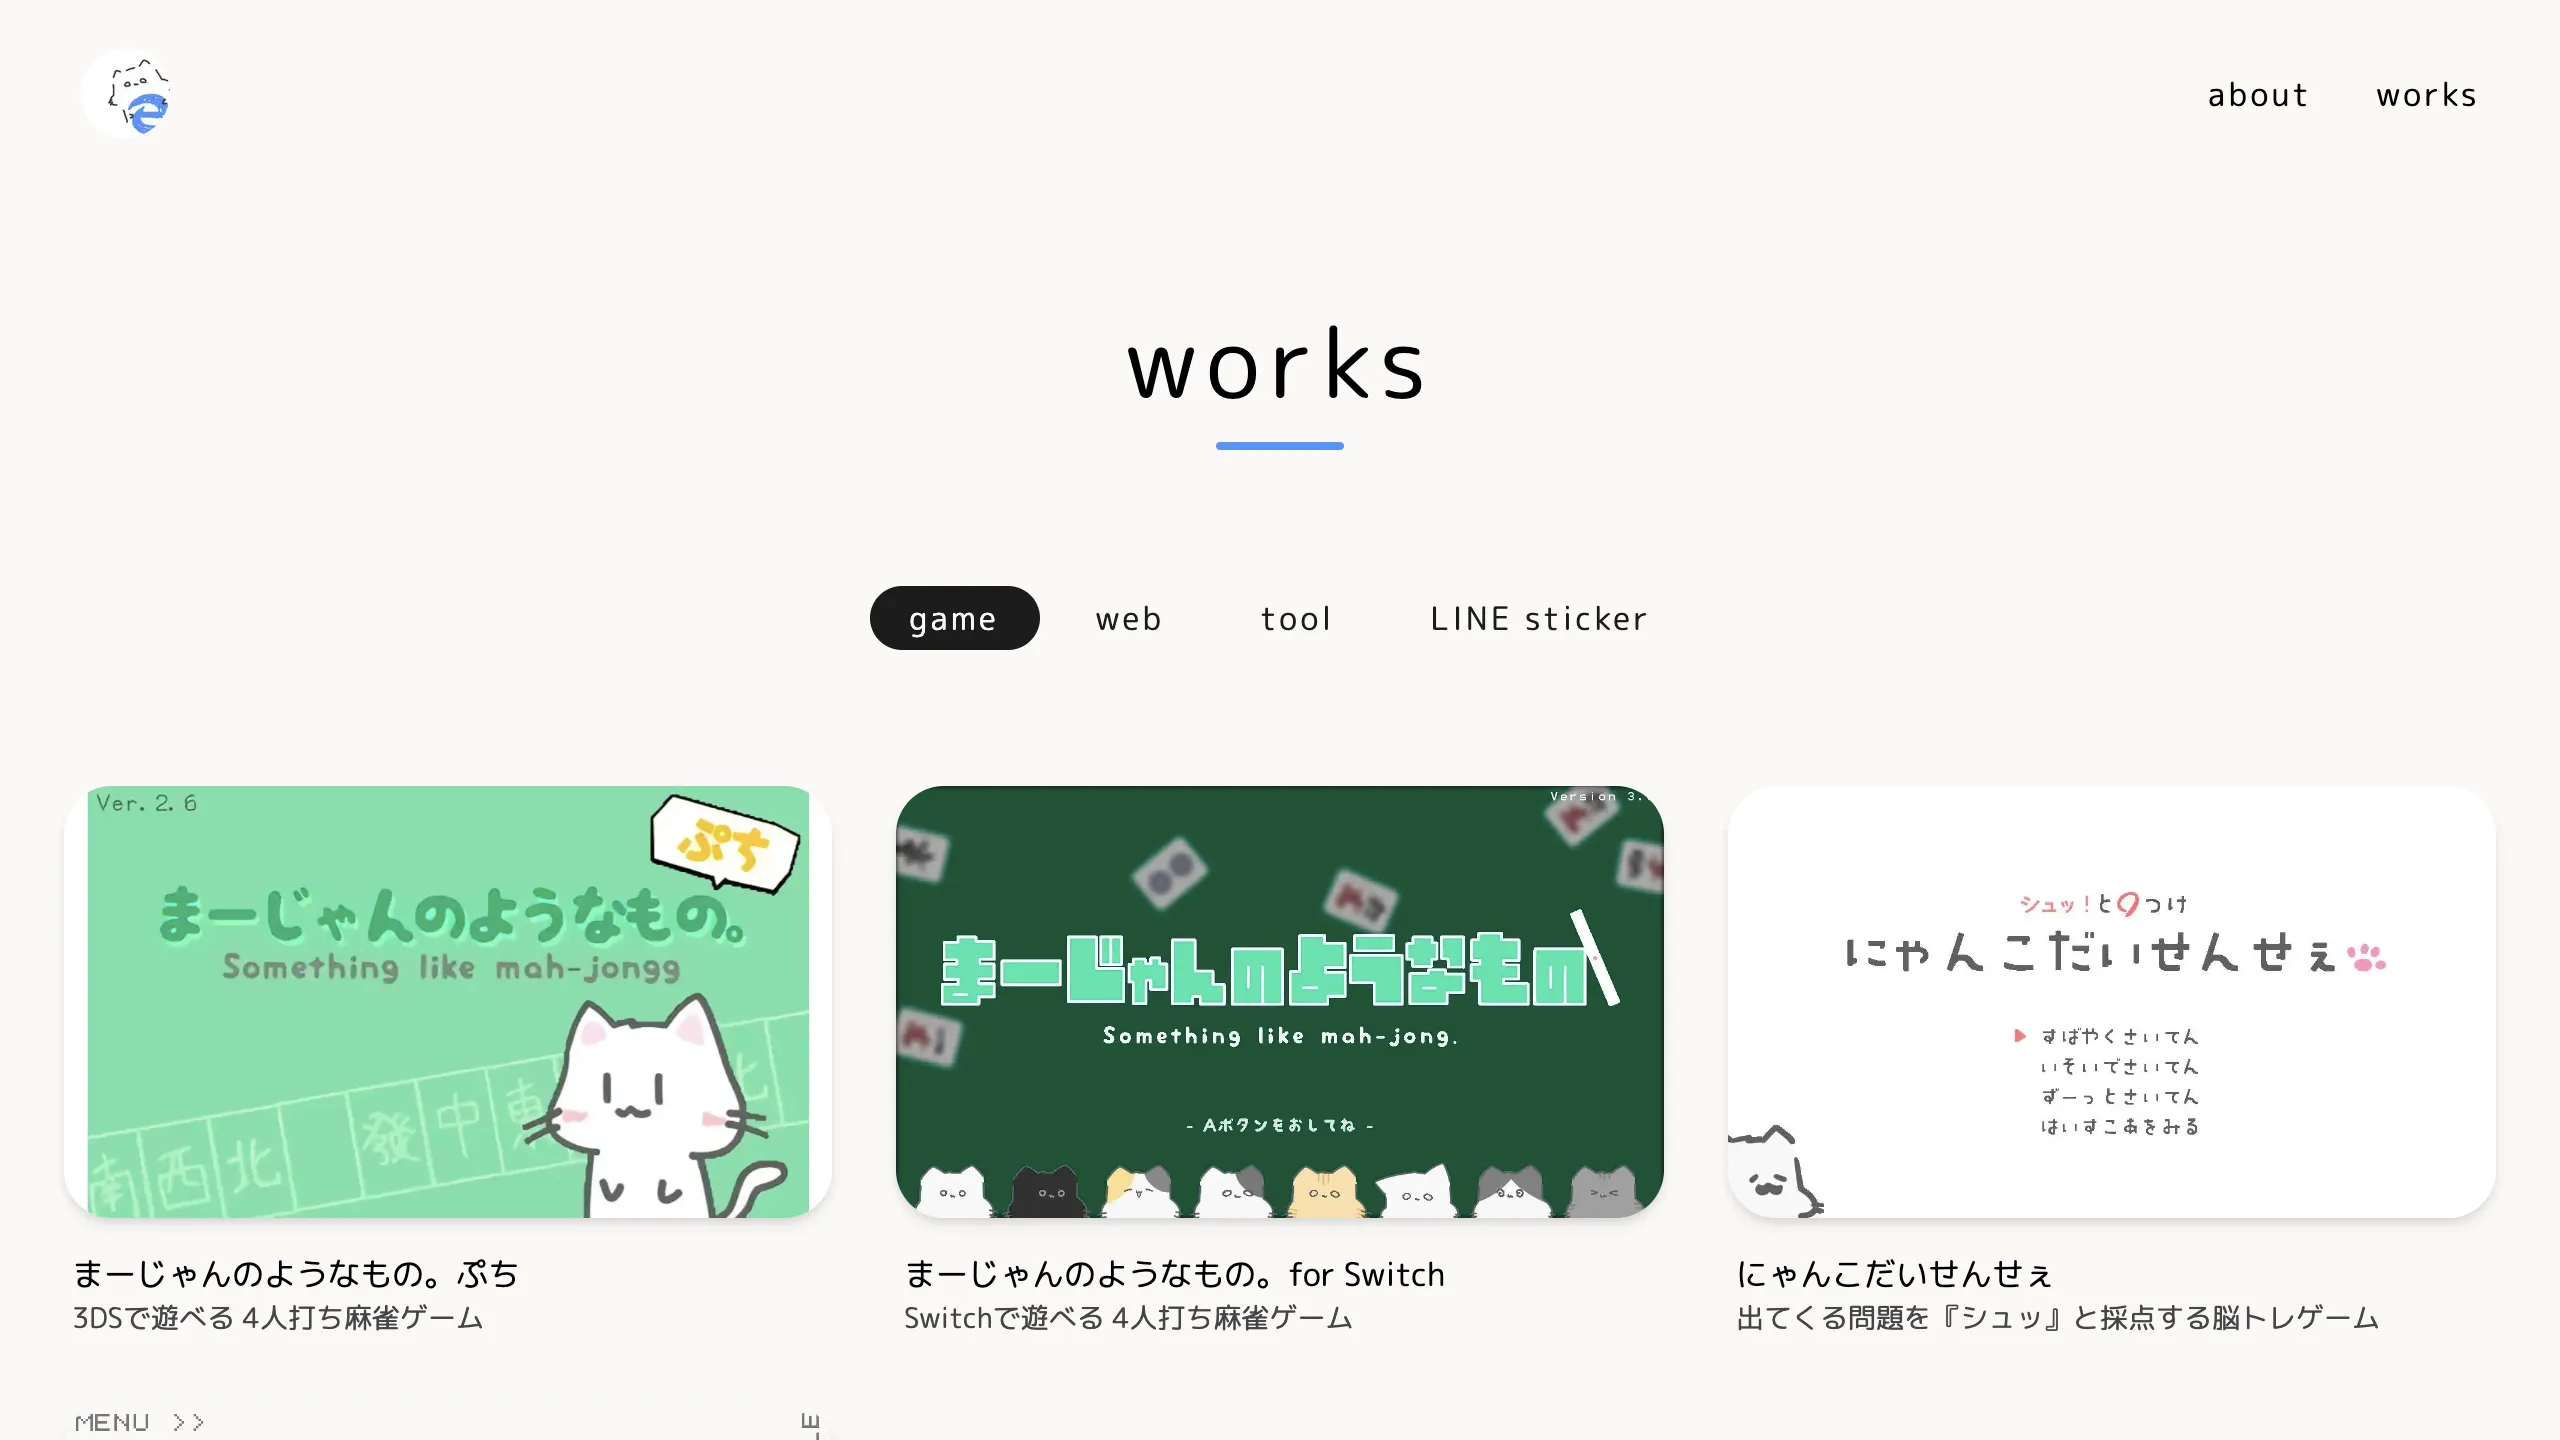 worksページ